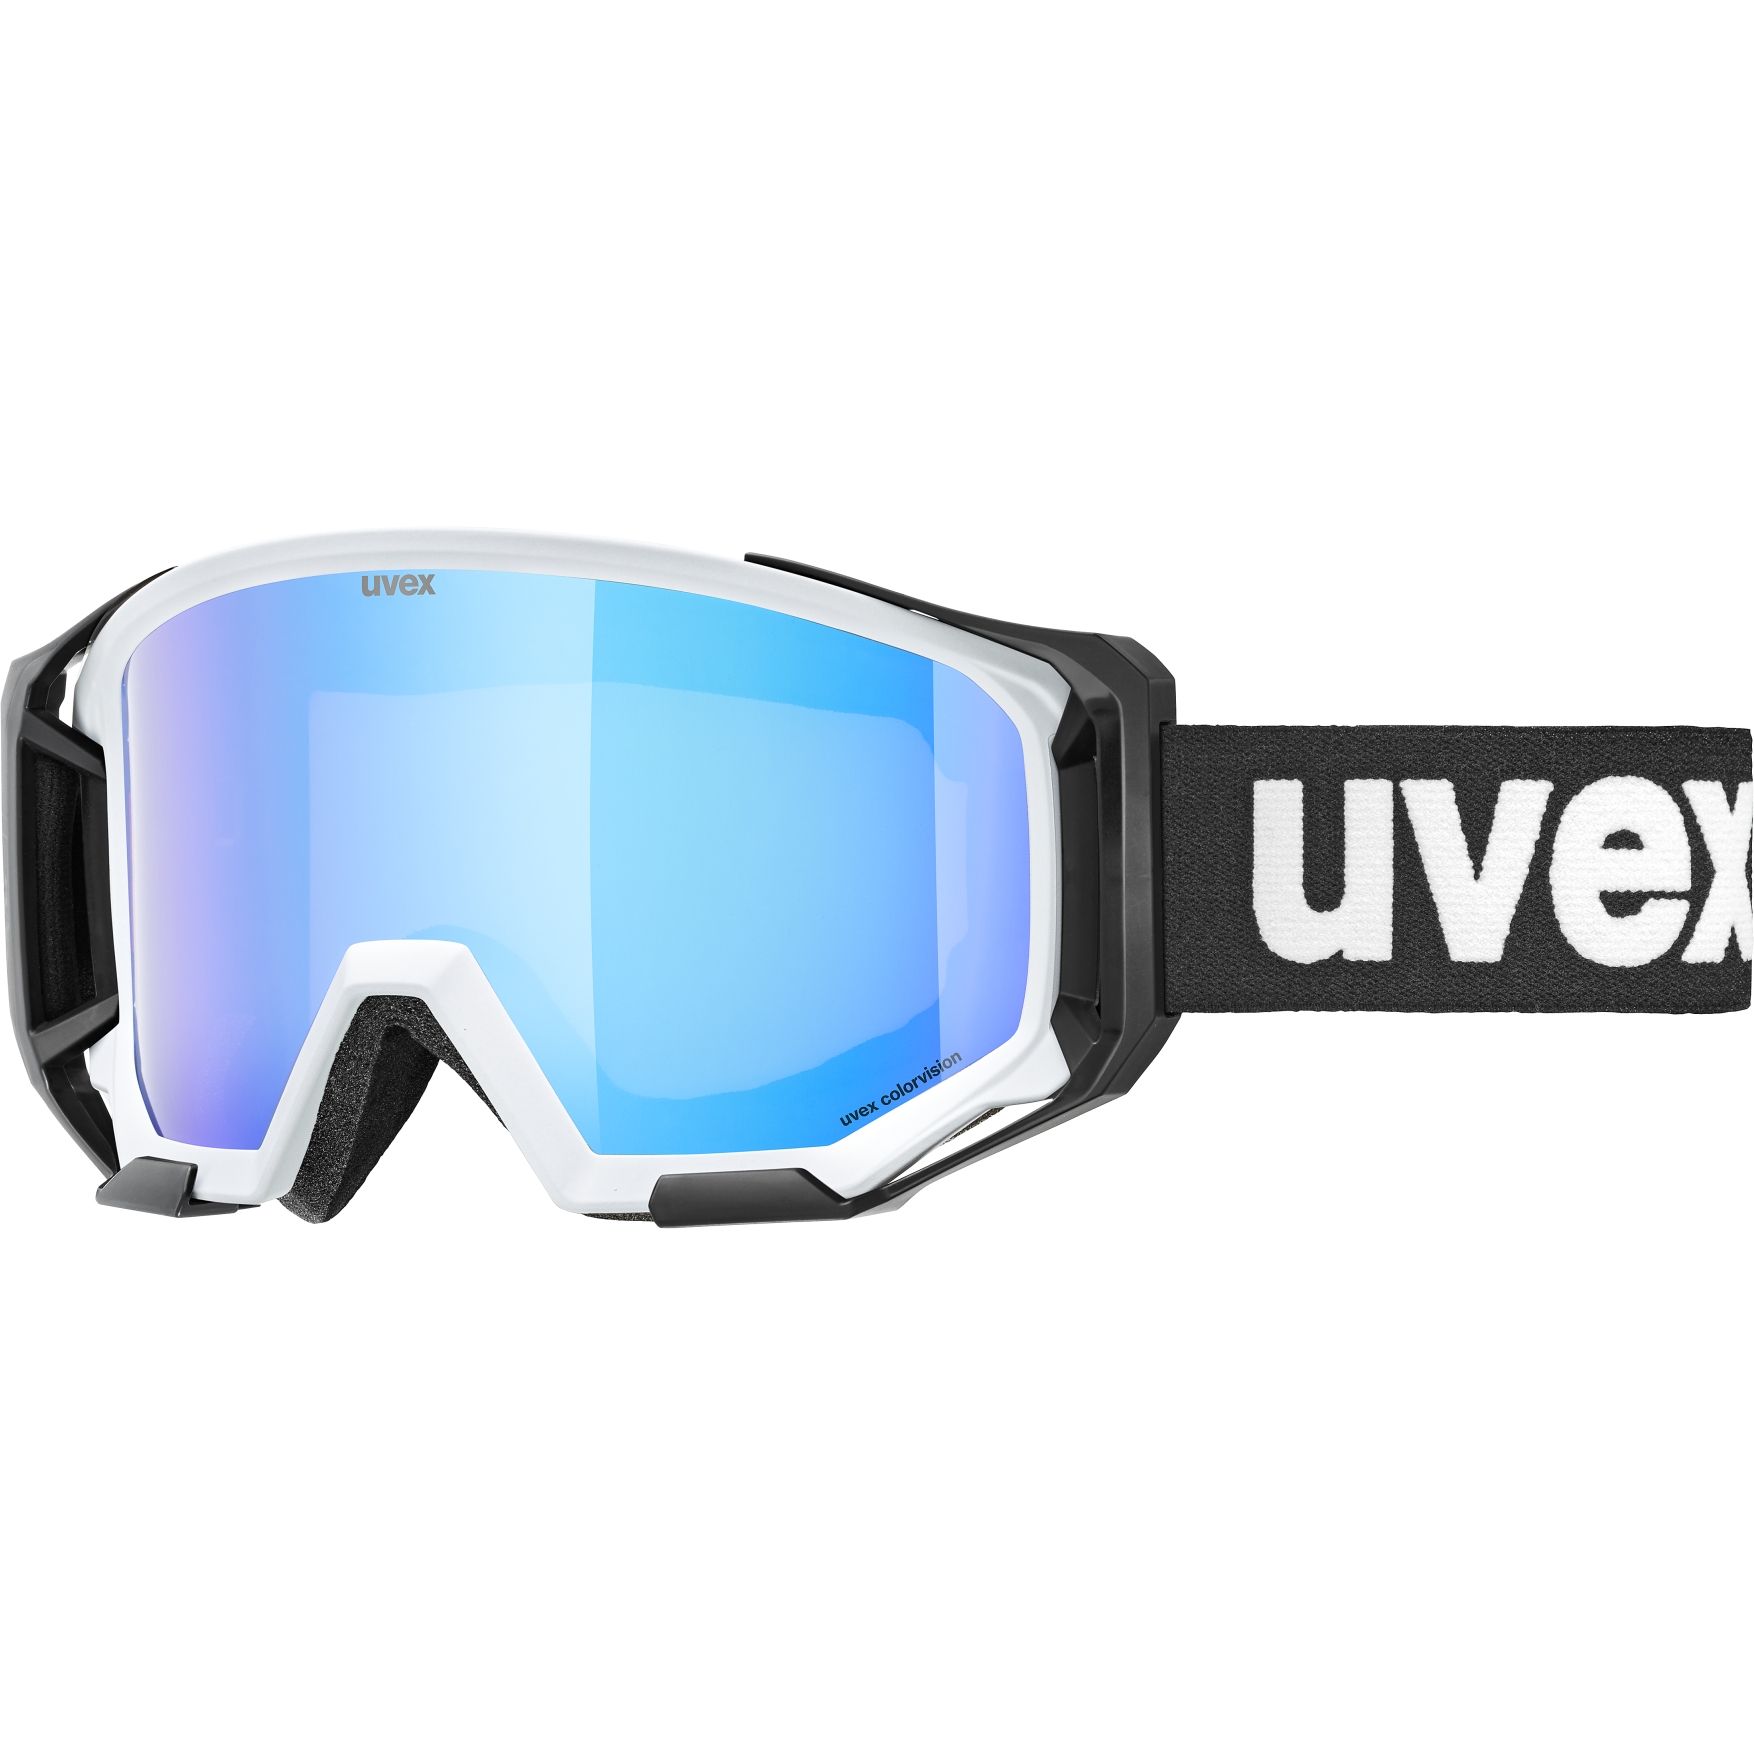 Image of Uvex athletic CV Goggle - cloud matt/colorvision green mirror blue